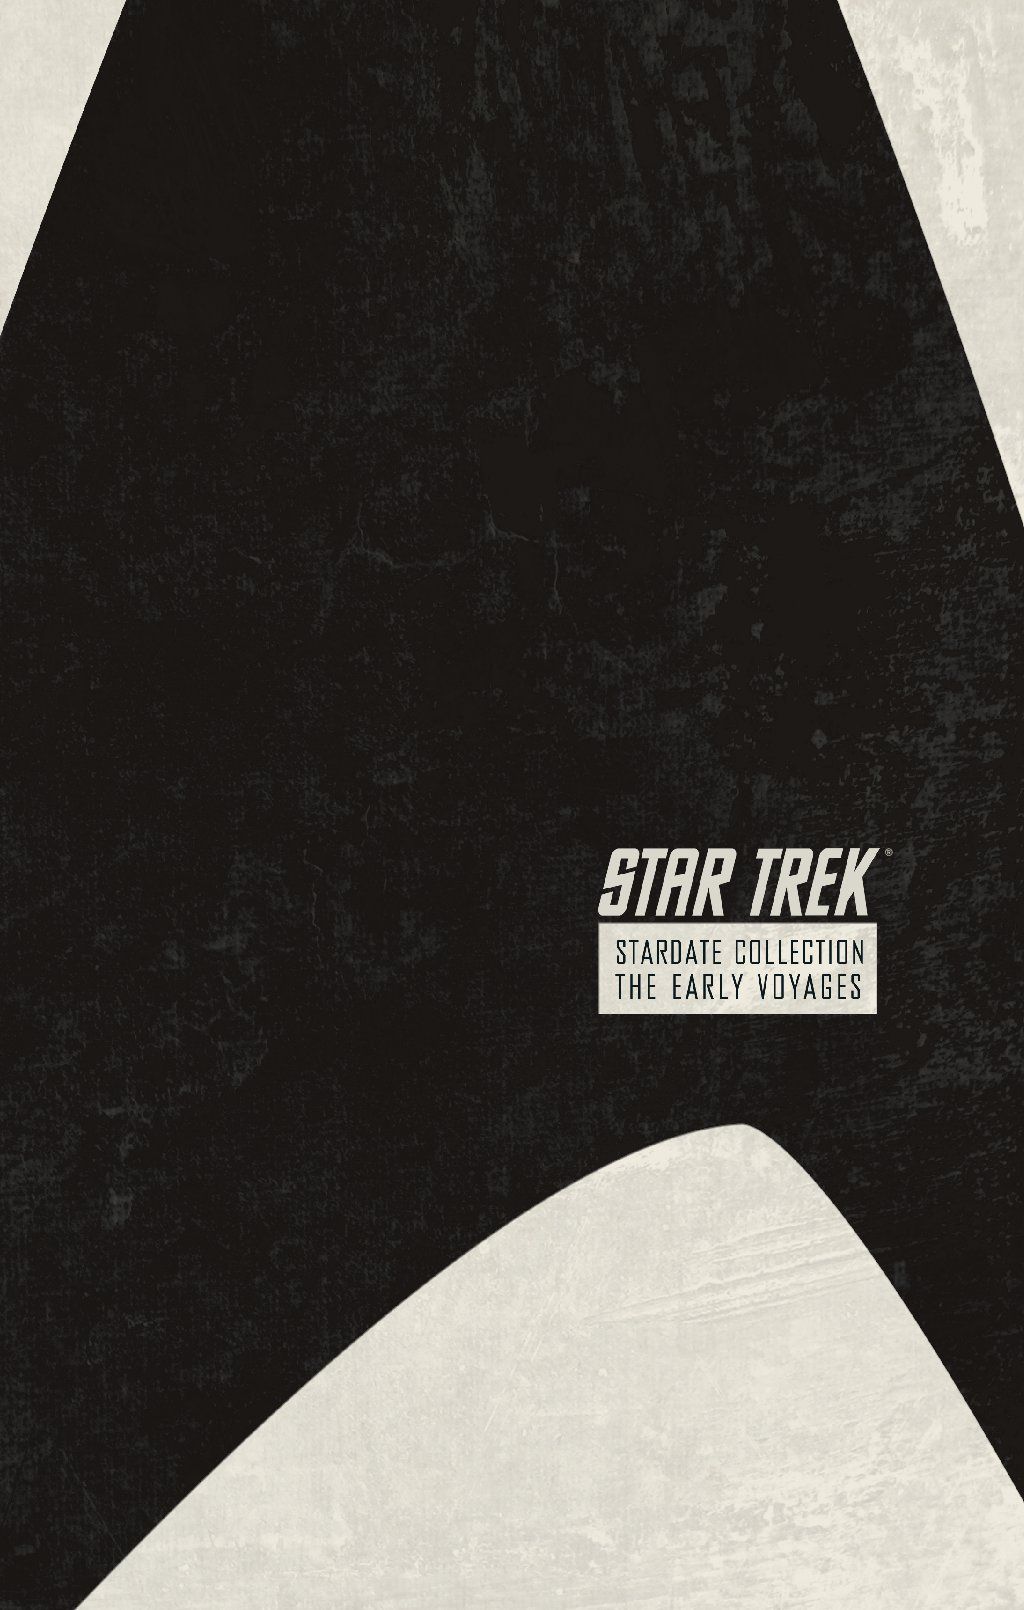 Star Trek: Stardate Collection Vol. 1: The Early Voyages